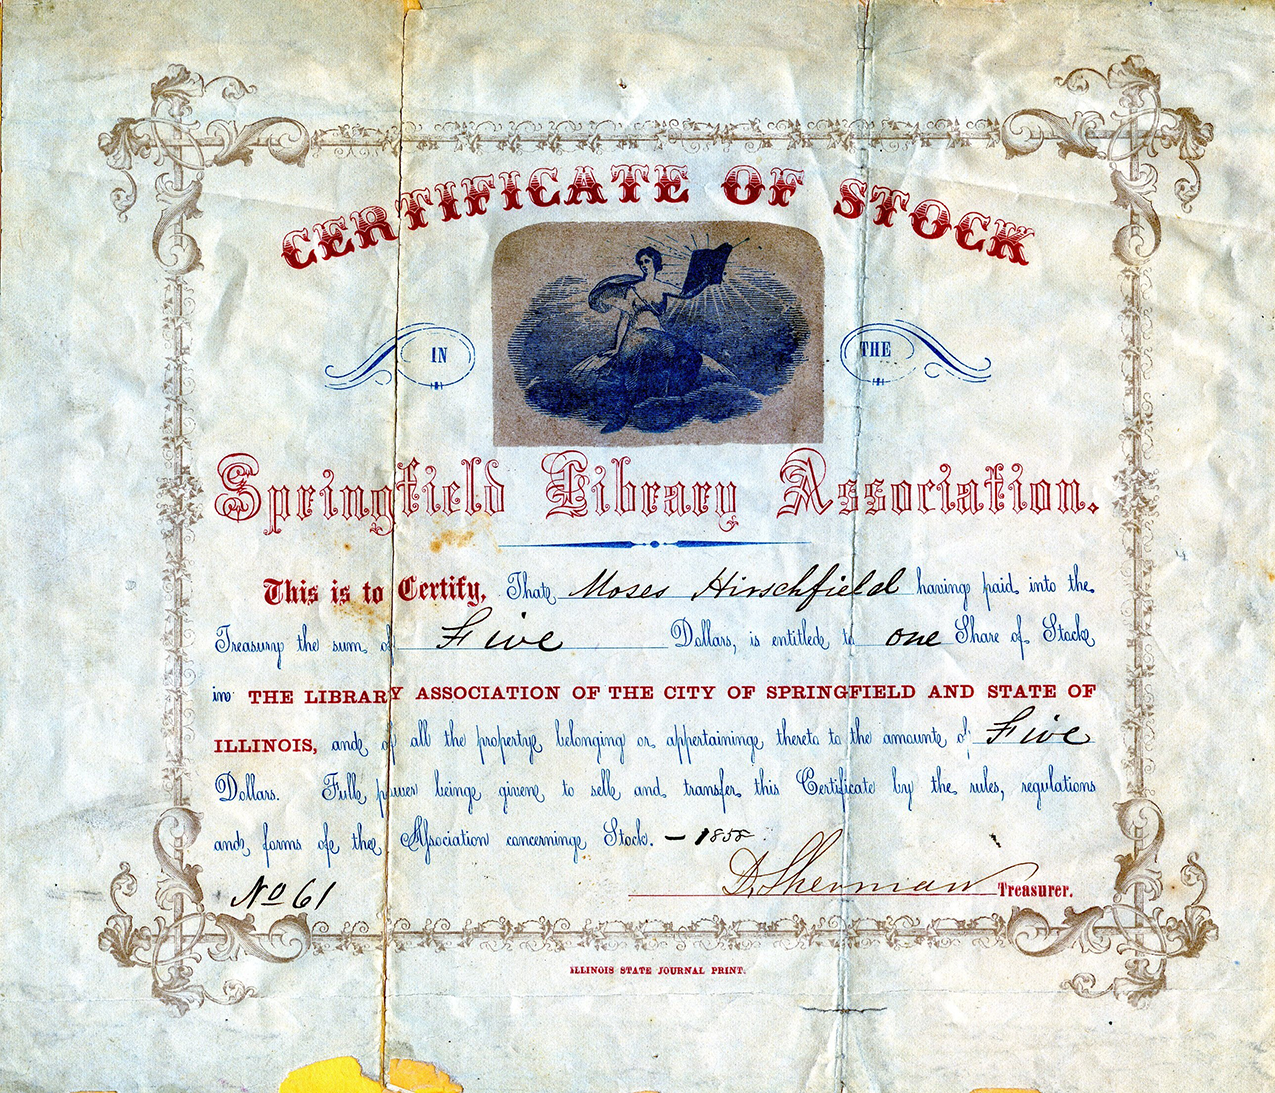 The Library Association Certificate from 1858